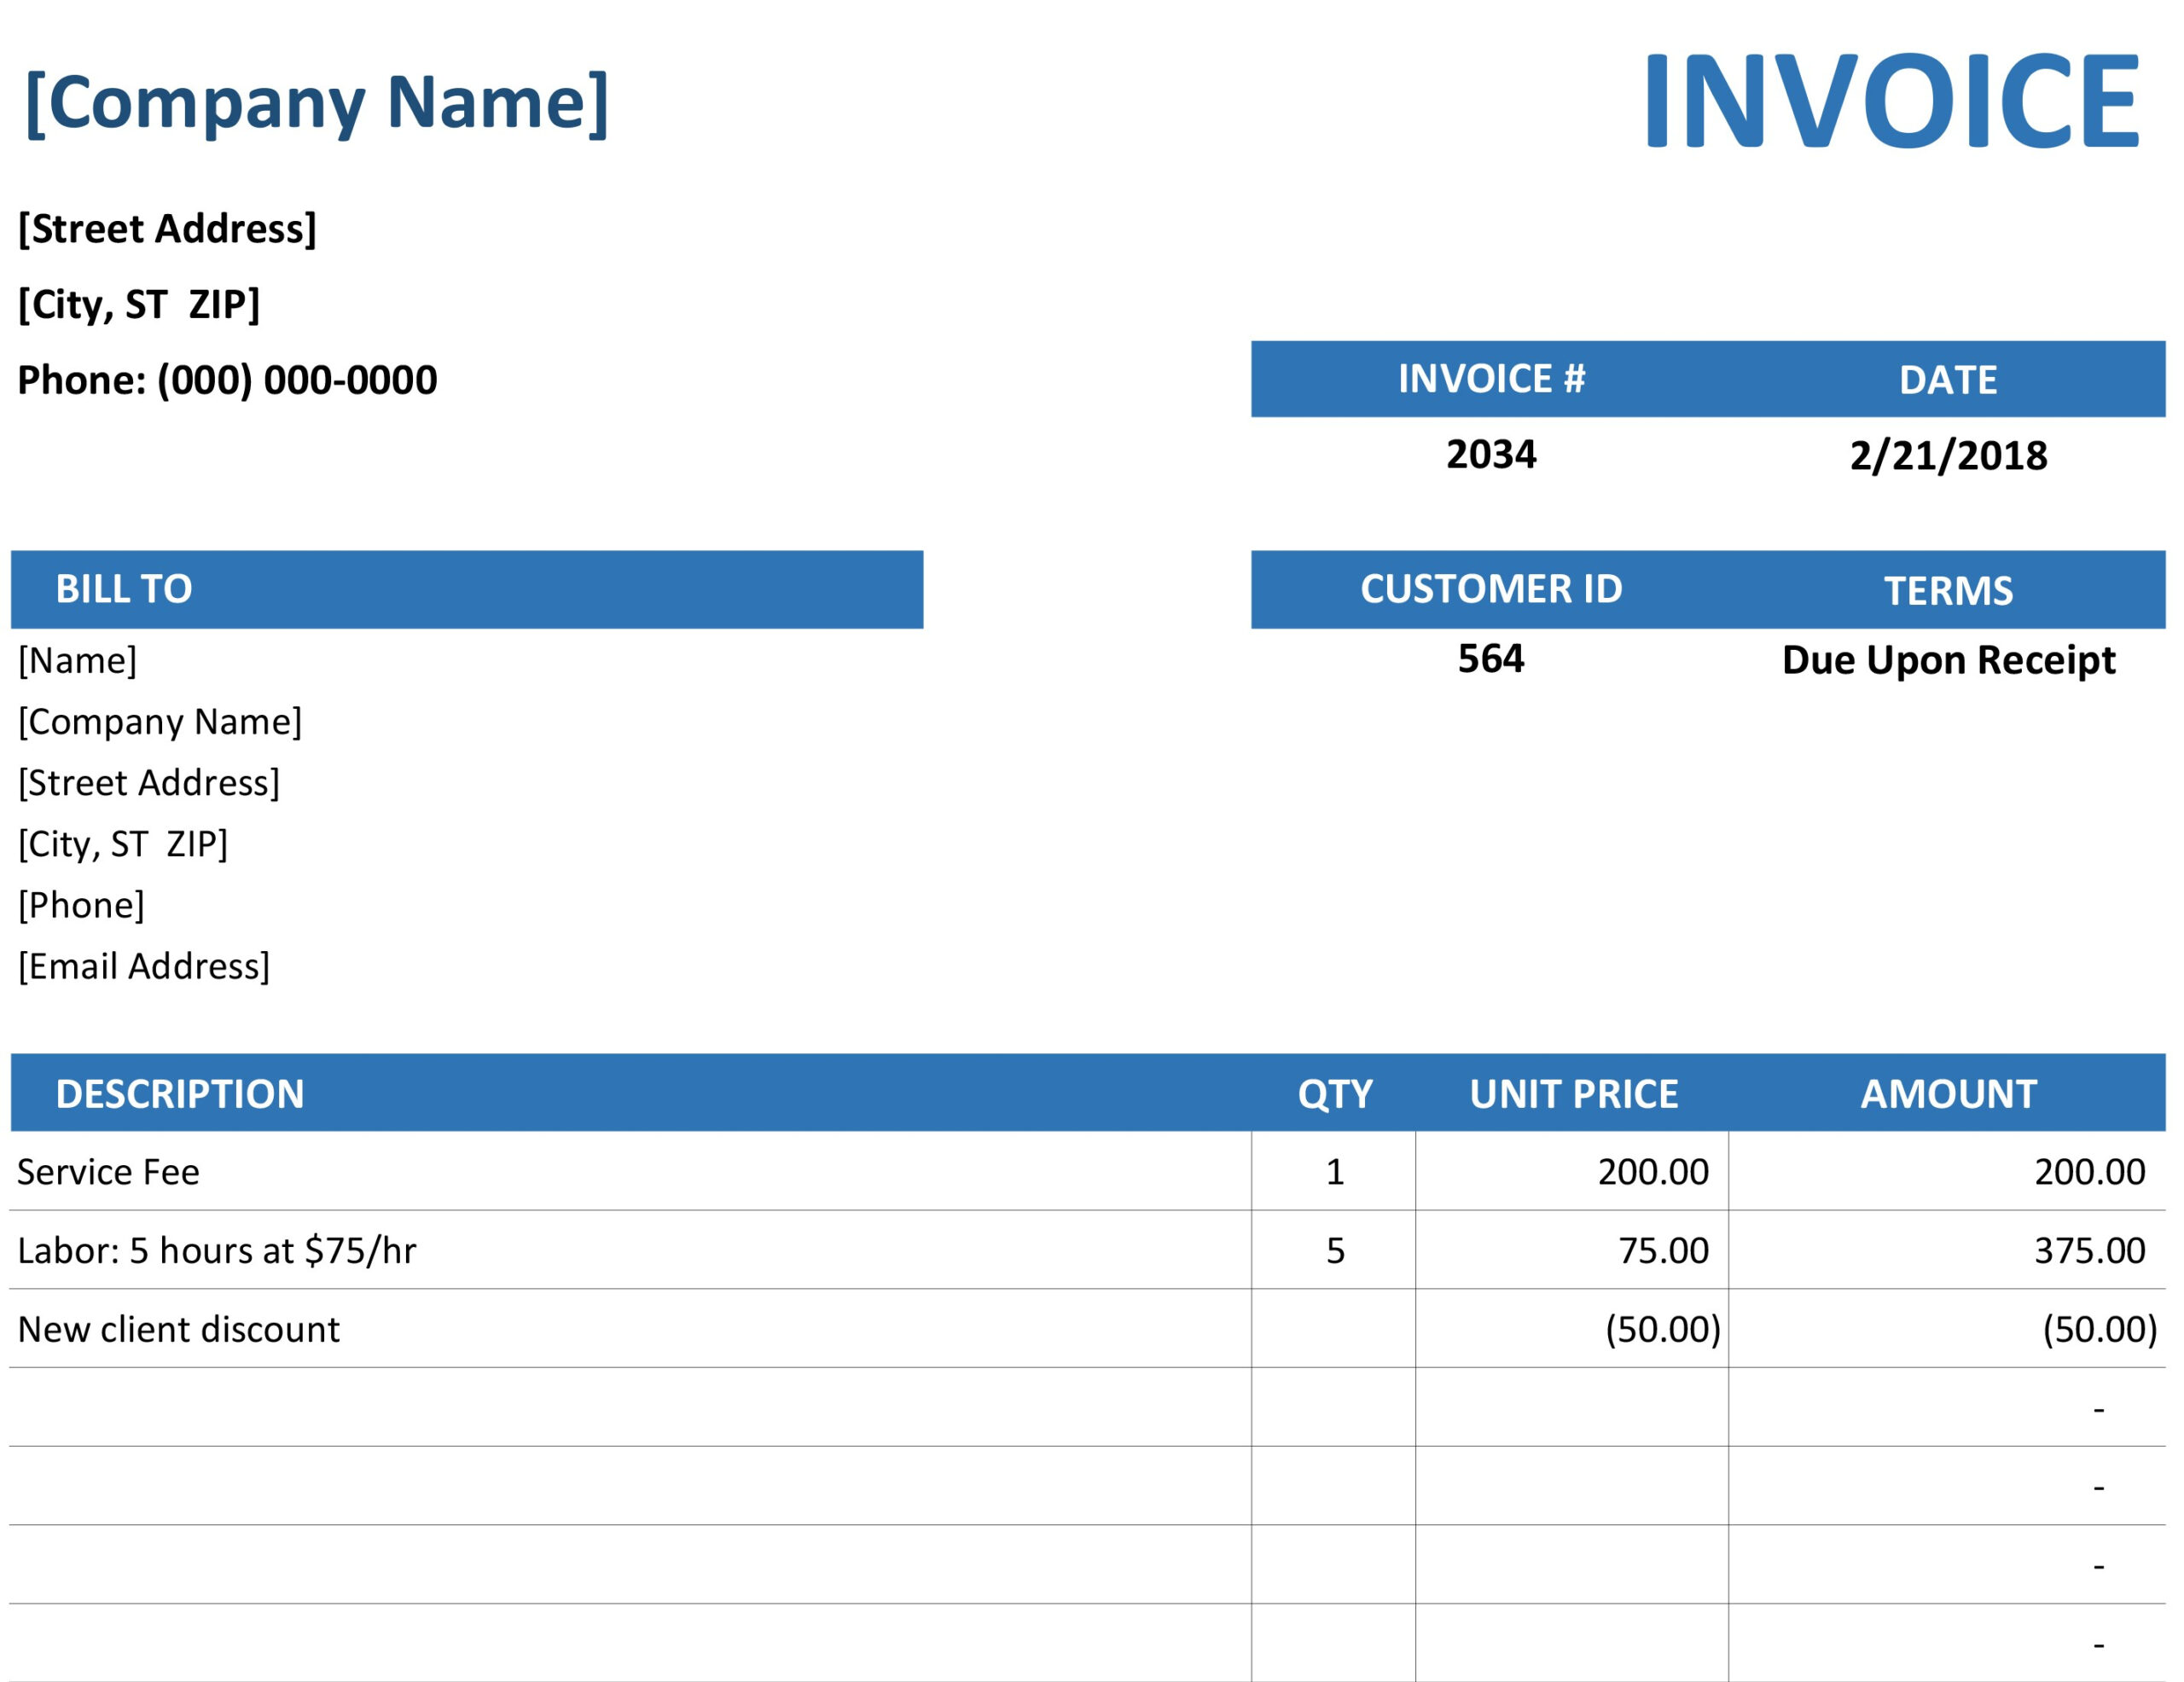 Simple Service Invoice With Image Of Invoice Template